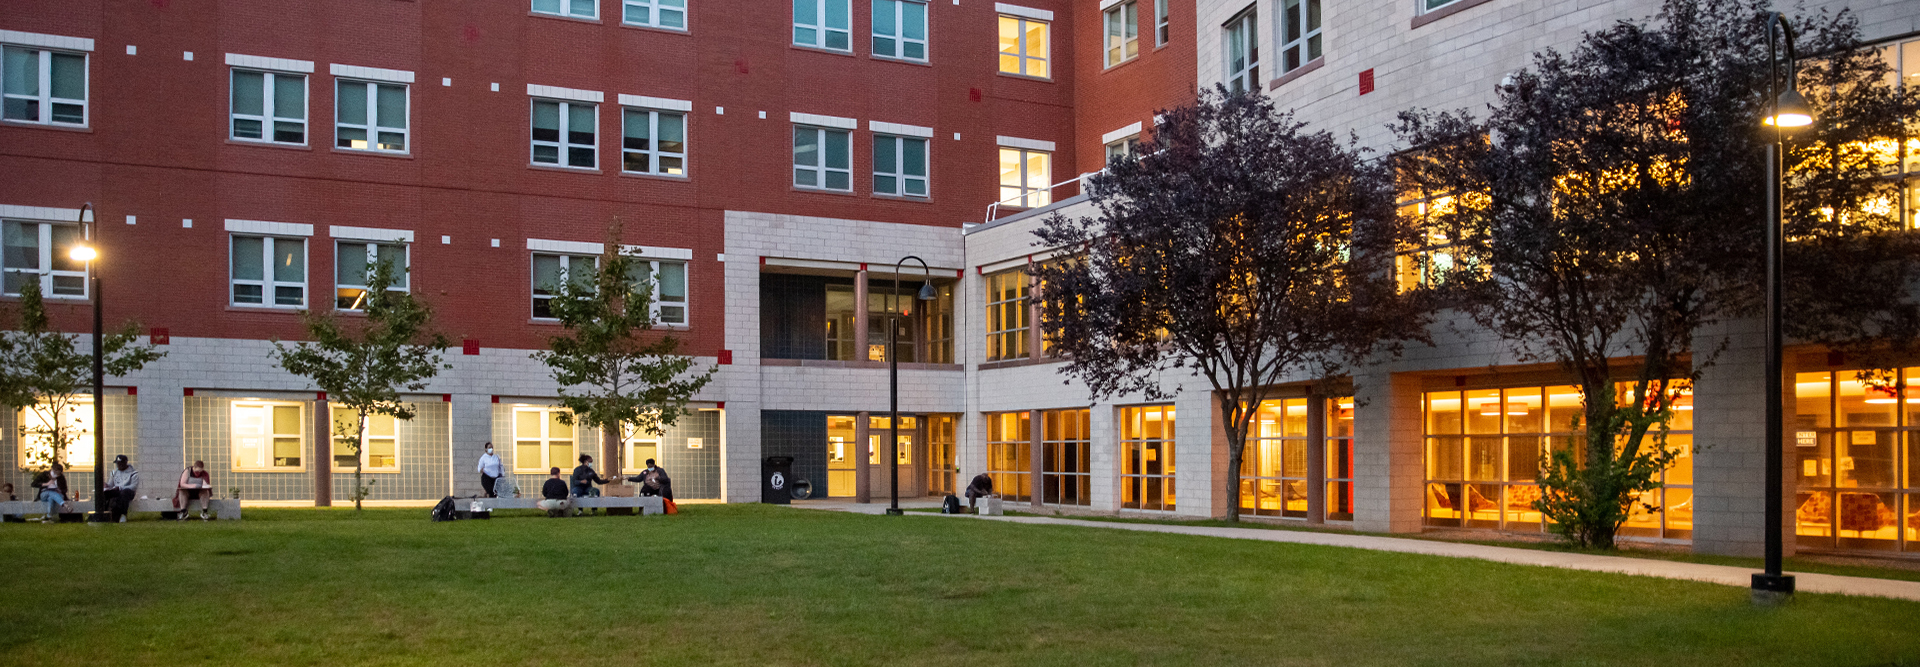 campus outside during evening